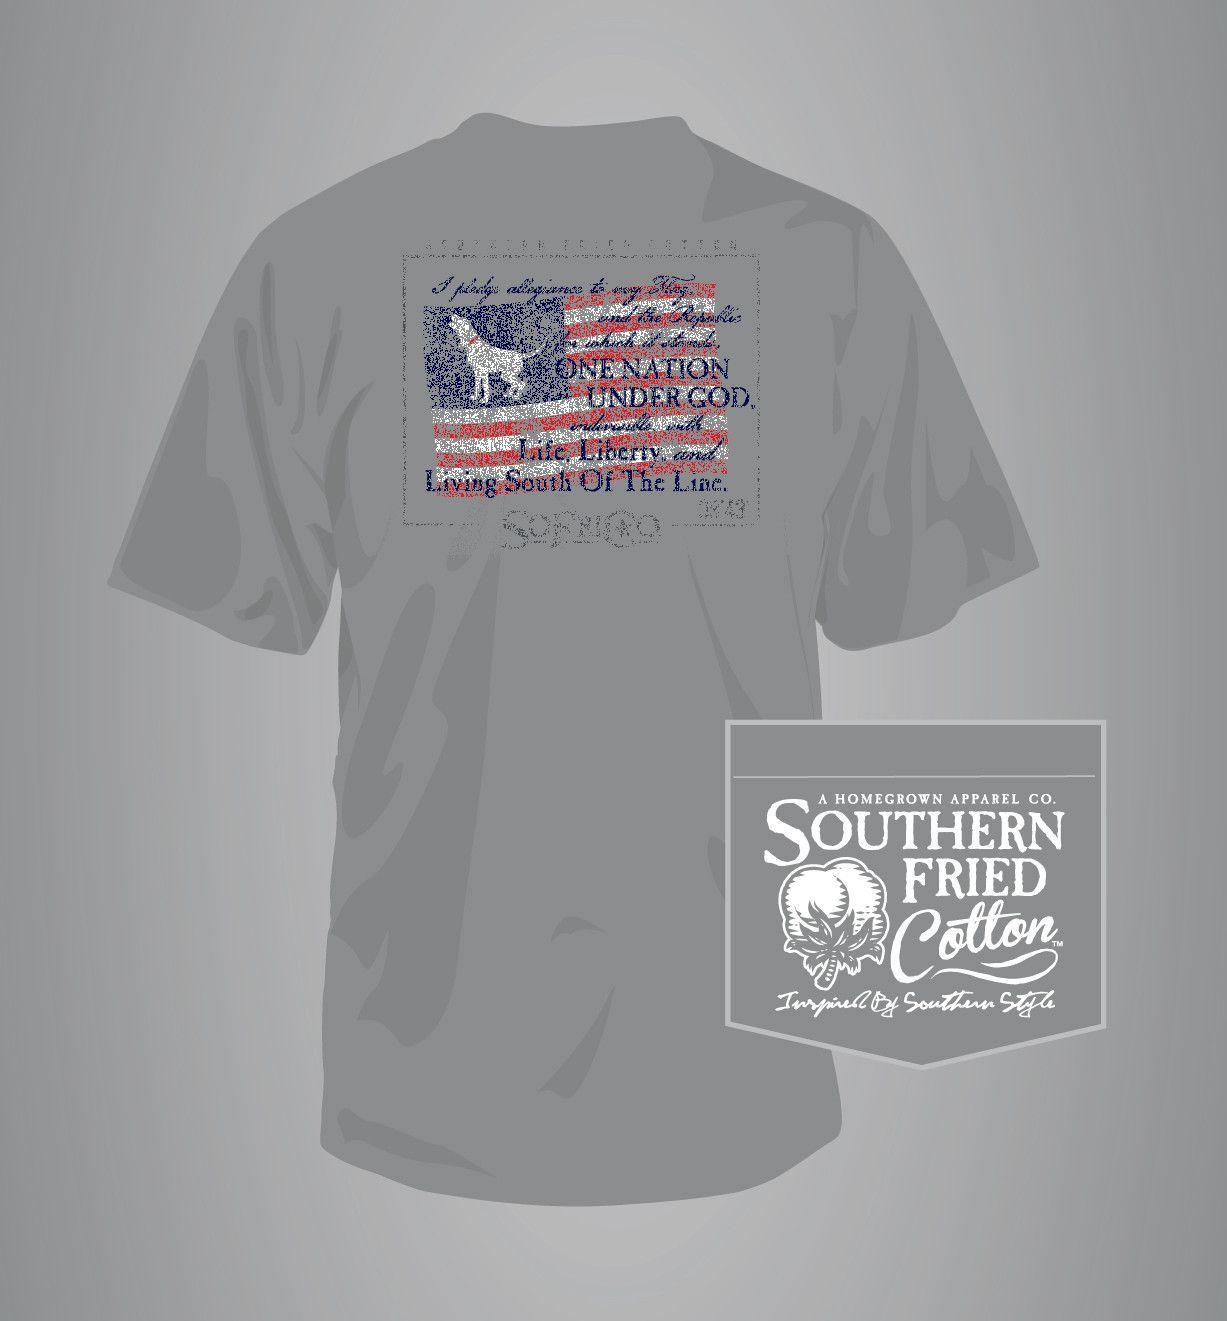 Simply Southern Company Logo - SOUTHERN FRIED COTTON TEE SHIRT S S 50% OFF AUGUST 14